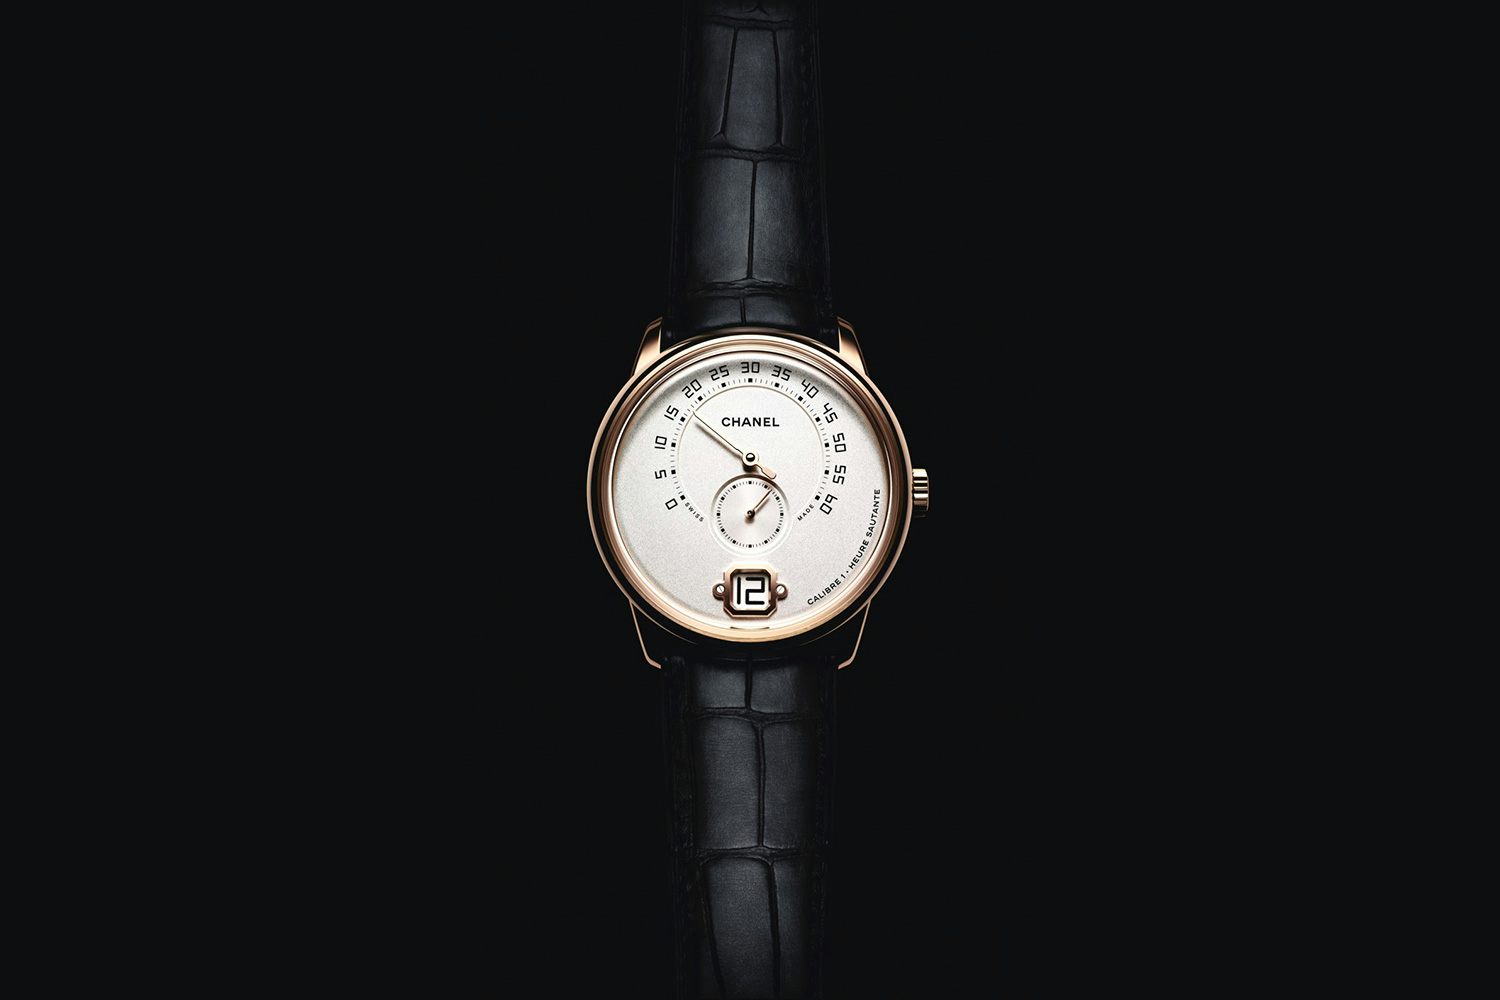 Introducing: The Monsieur de Chanel: Chanel's First Dedicated Men's Watch,  And It's Completely In-House And VERY Impressive - Hodinkee